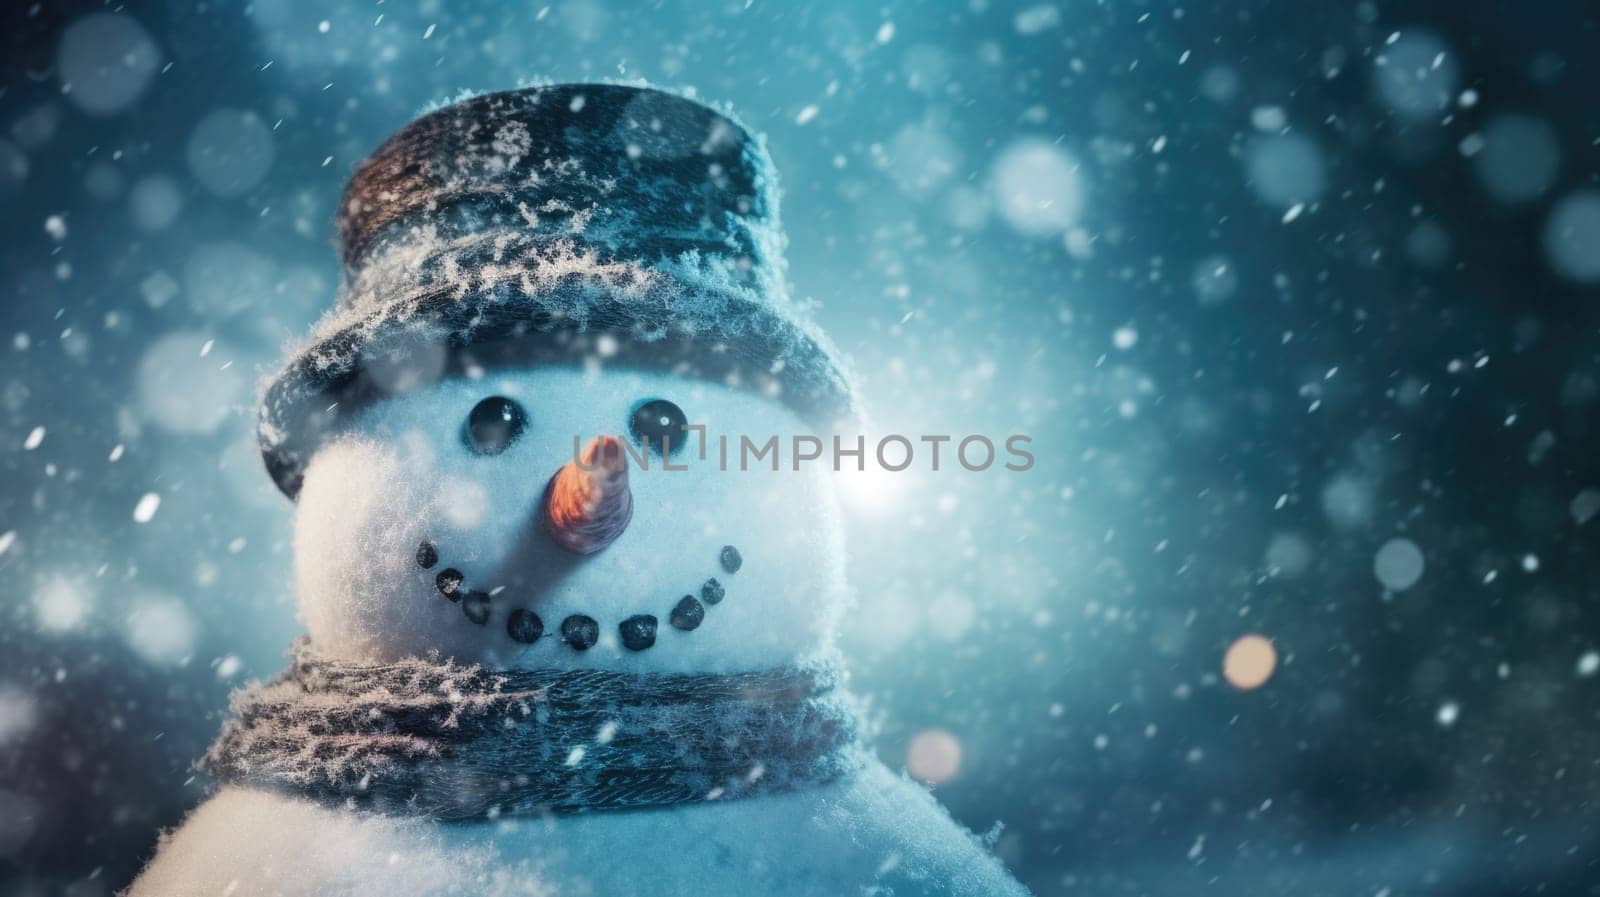 A snowman with a hat and scarf is standing in the snow, AI by starush